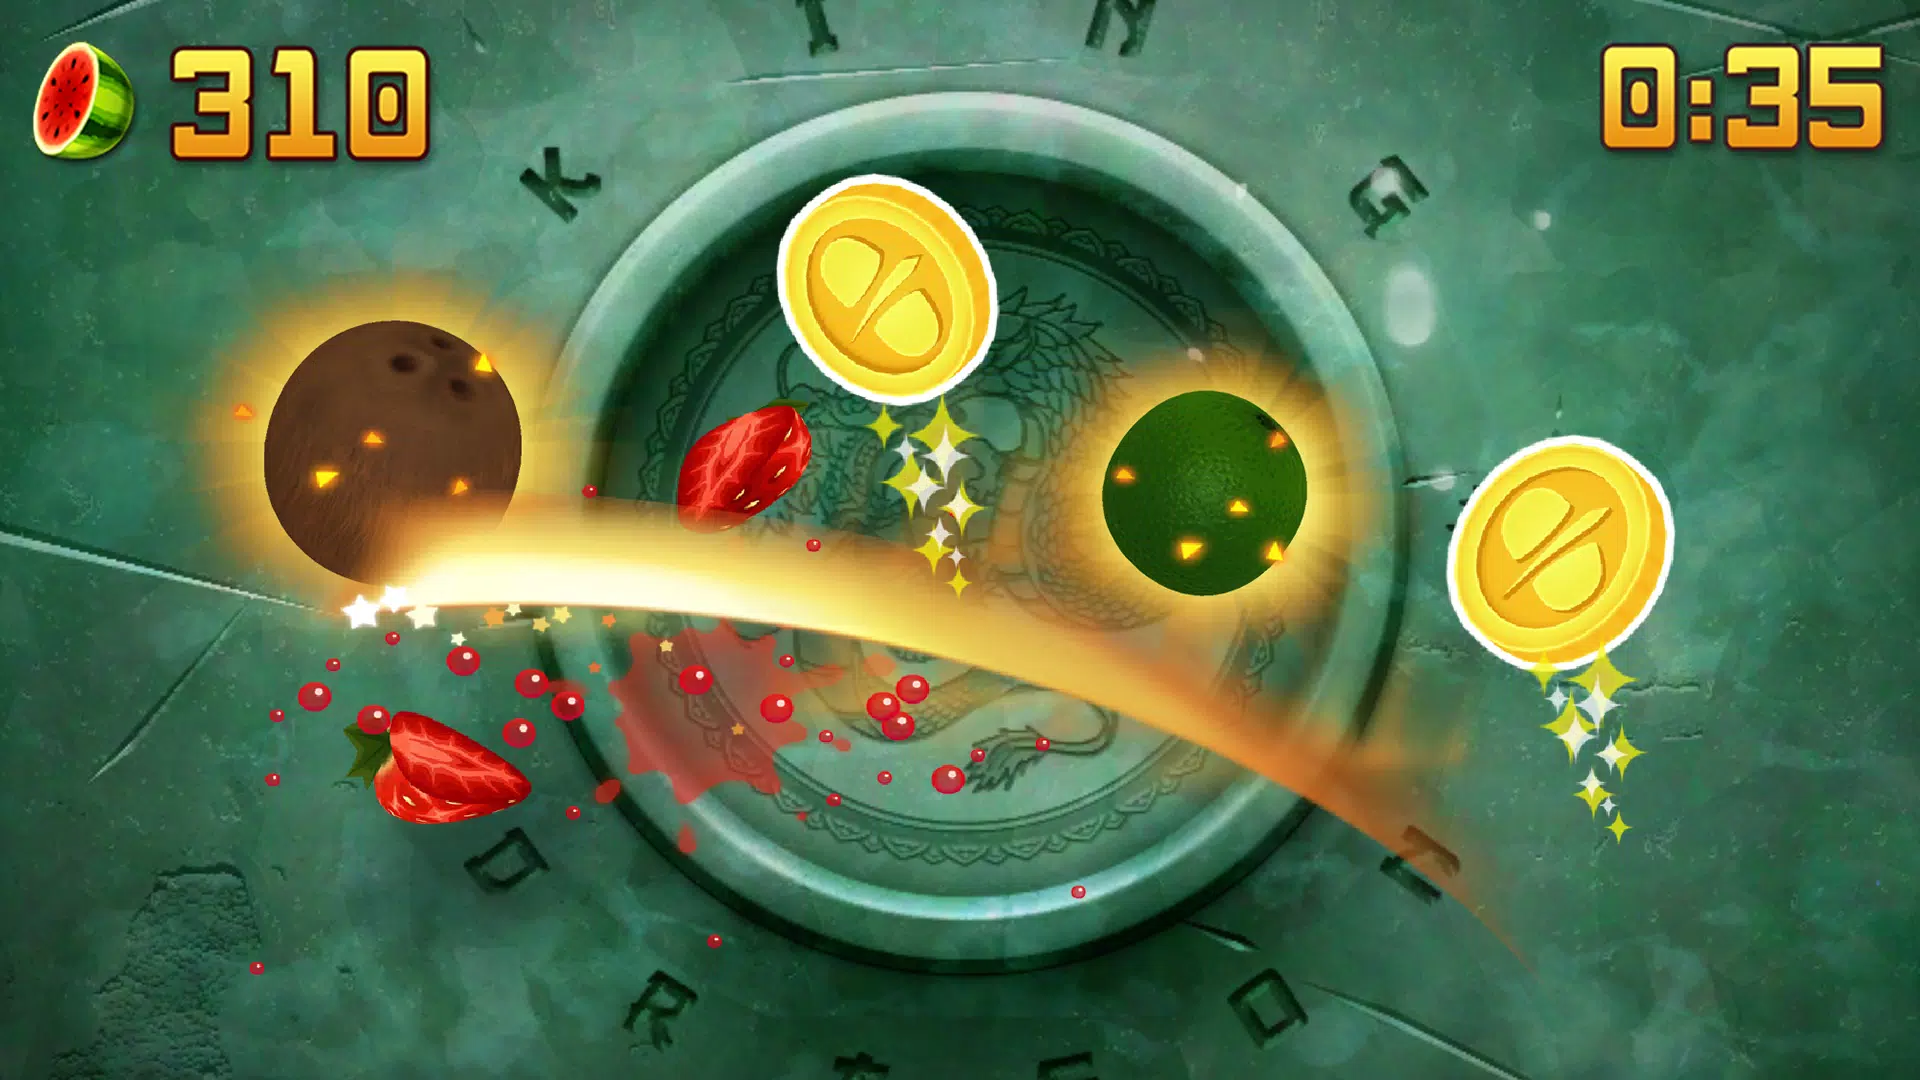 Download Fruit Ninja APK for Android